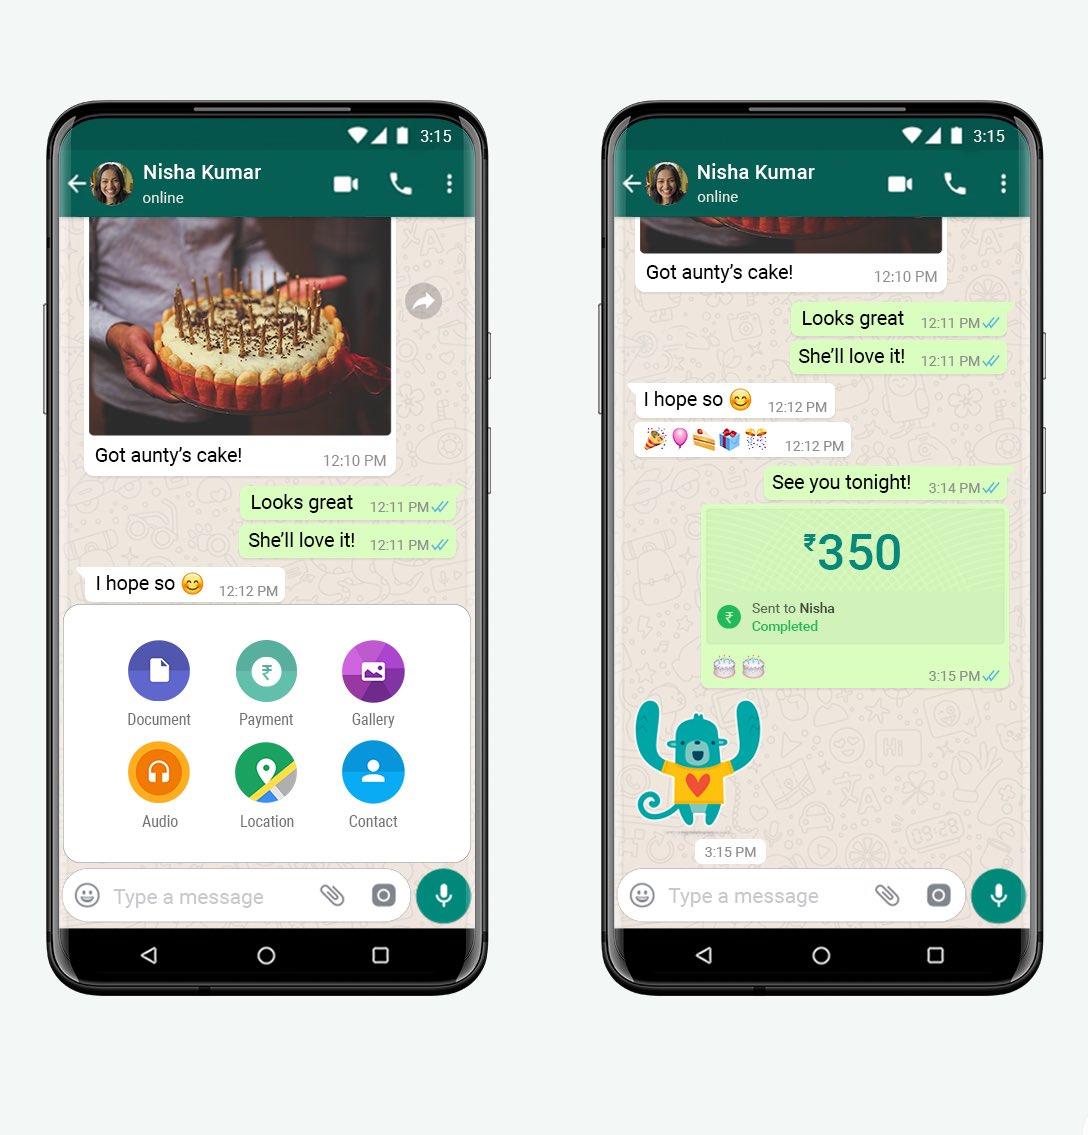 Here is how you can now send money via WhatsApp